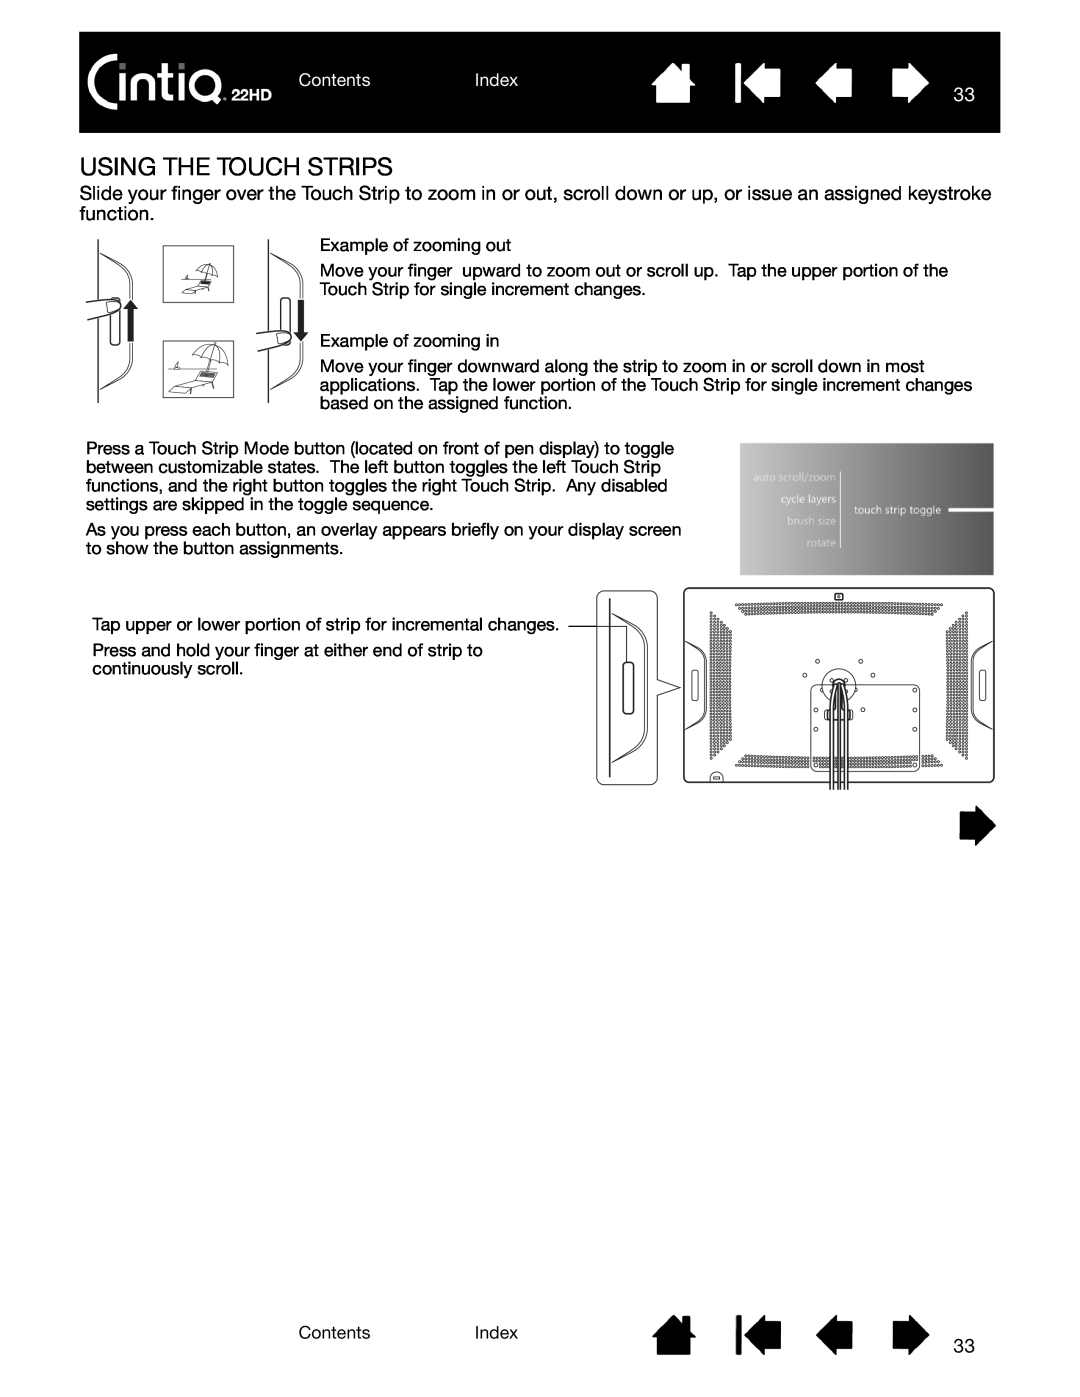 Wacom DTK-2200 user manual Using The Touch Strips, ContentsIndex 